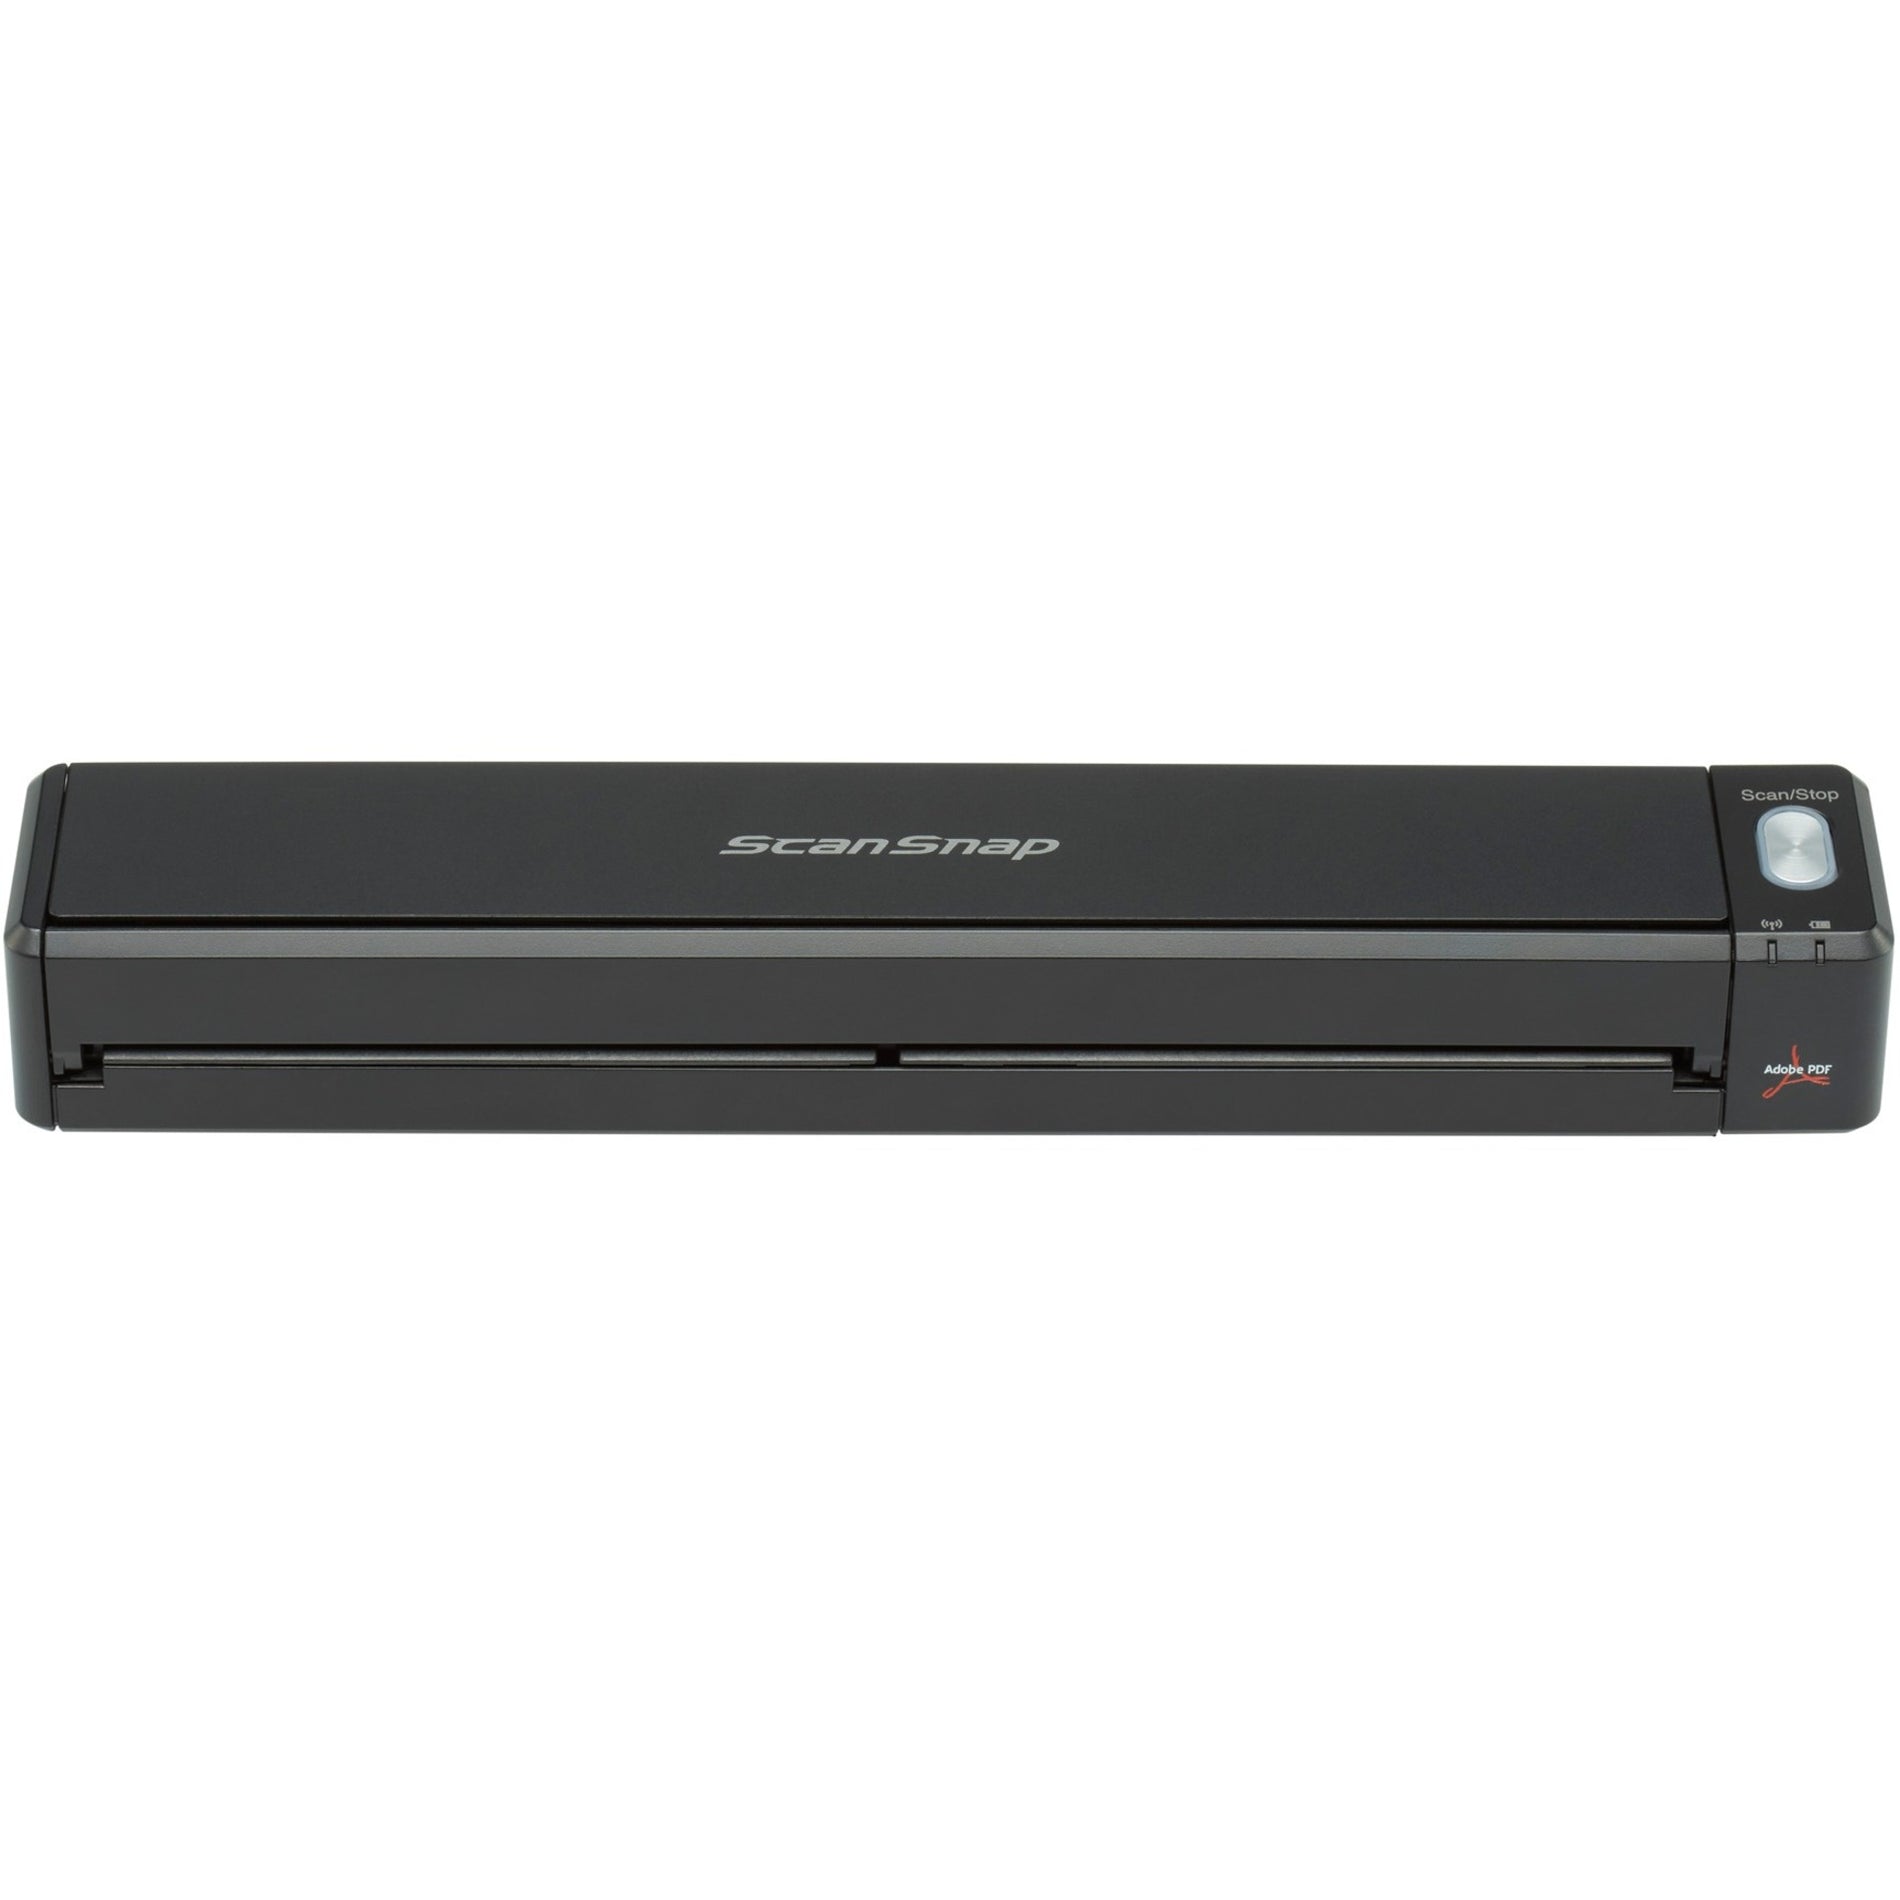 Fujitsu PA03688-B005 ScanSnap iX100 Mobile Scanner for PC and Mac, Wireless, Portable, Color Scanning